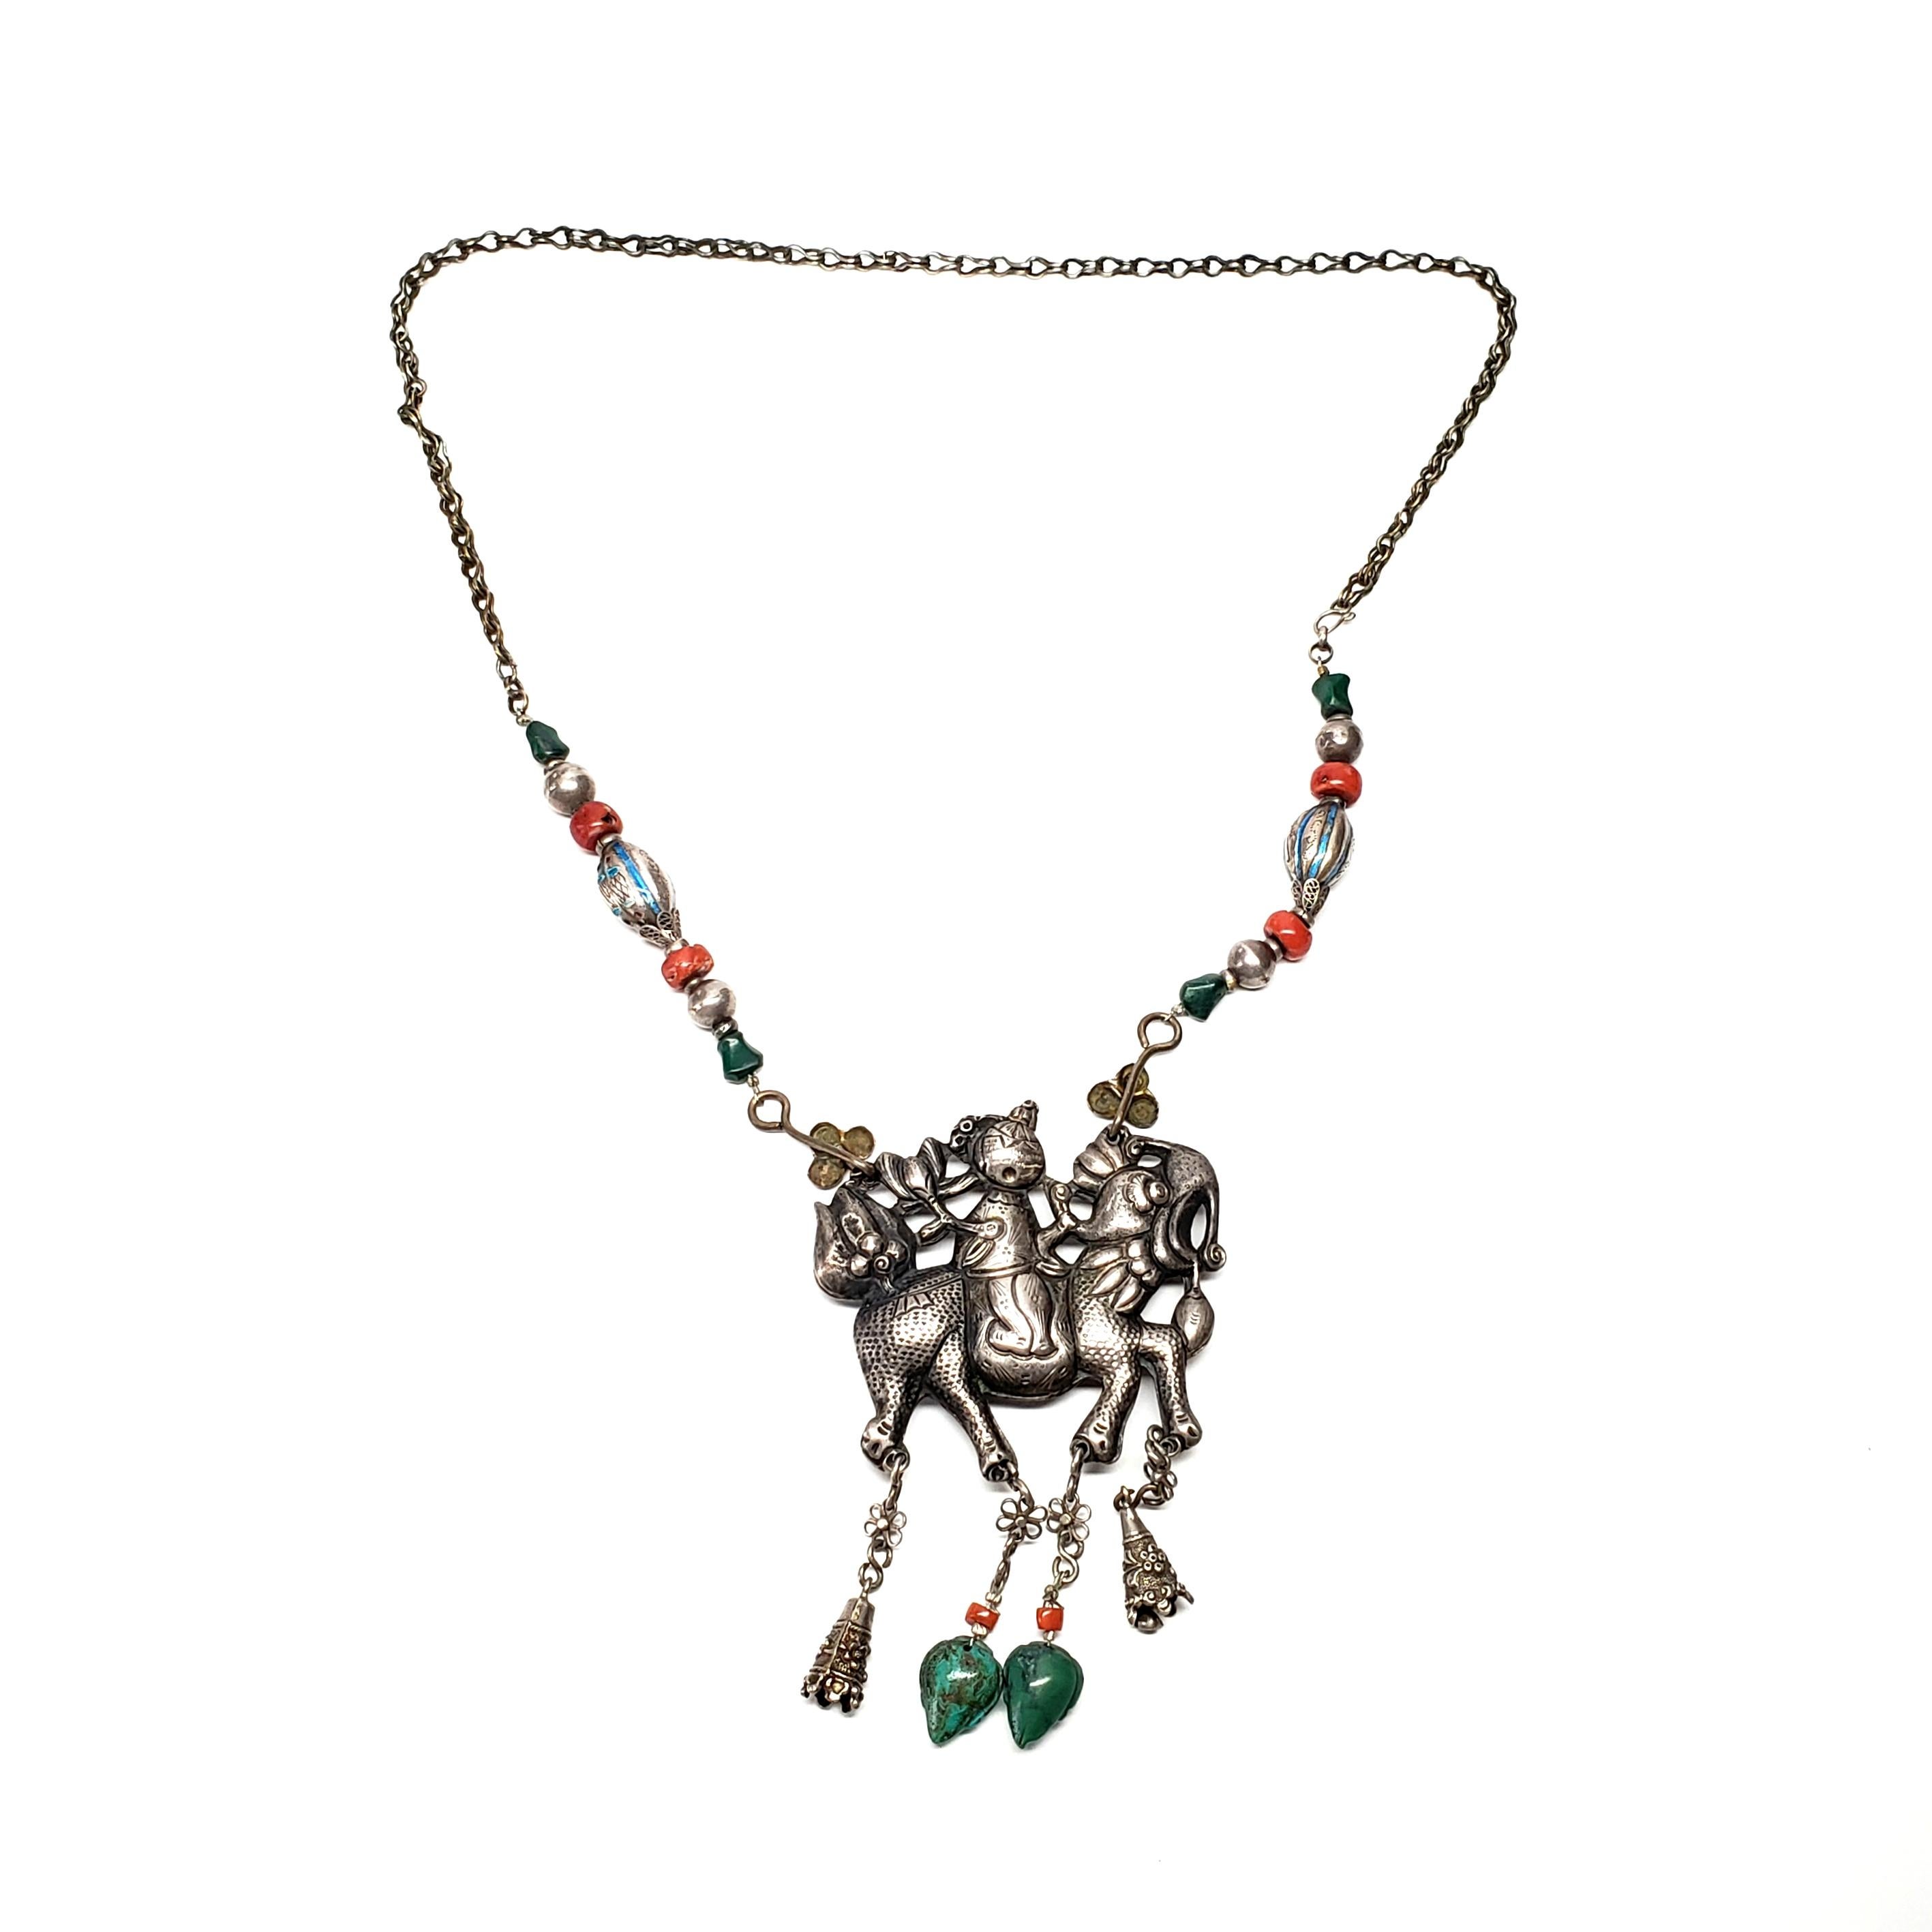 Antique Chinese Qilin (Kylin) amulet and beaded necklace.

The Qilin is a Chinese mythical creature, often called a Chinese unicorn. This amulet features a rider on the Qilin for luck and good fortune. The amulet hangs from a beaded necklace